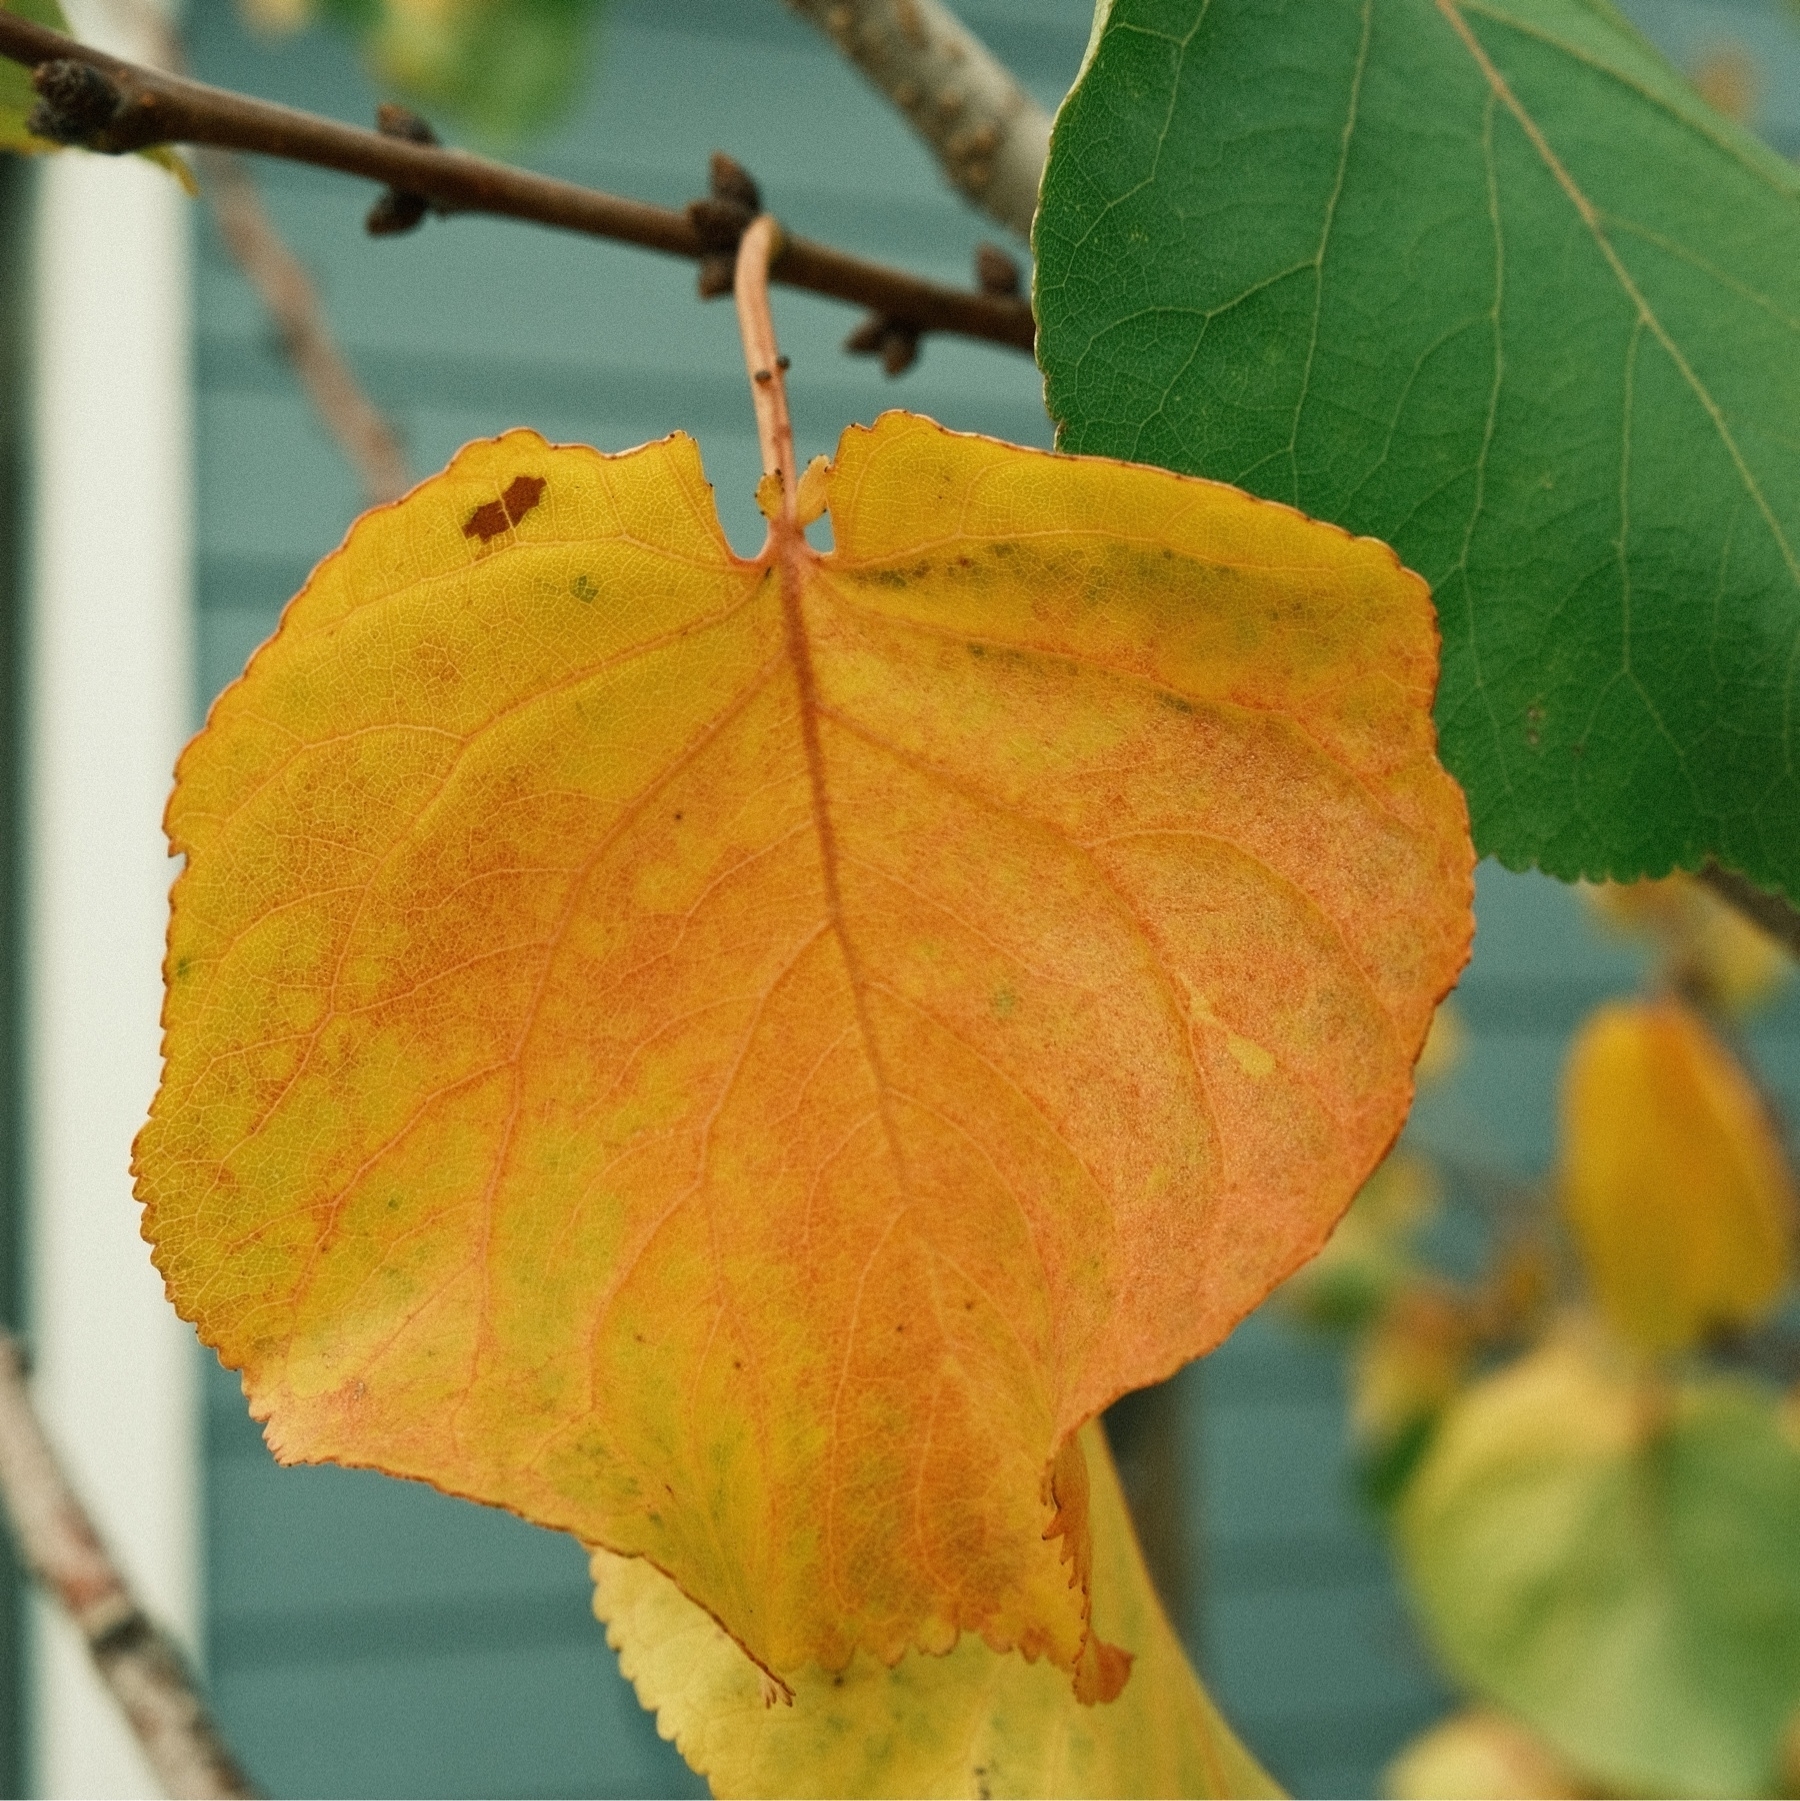 yellow heart shaped apricot leaf in front of a green leaf